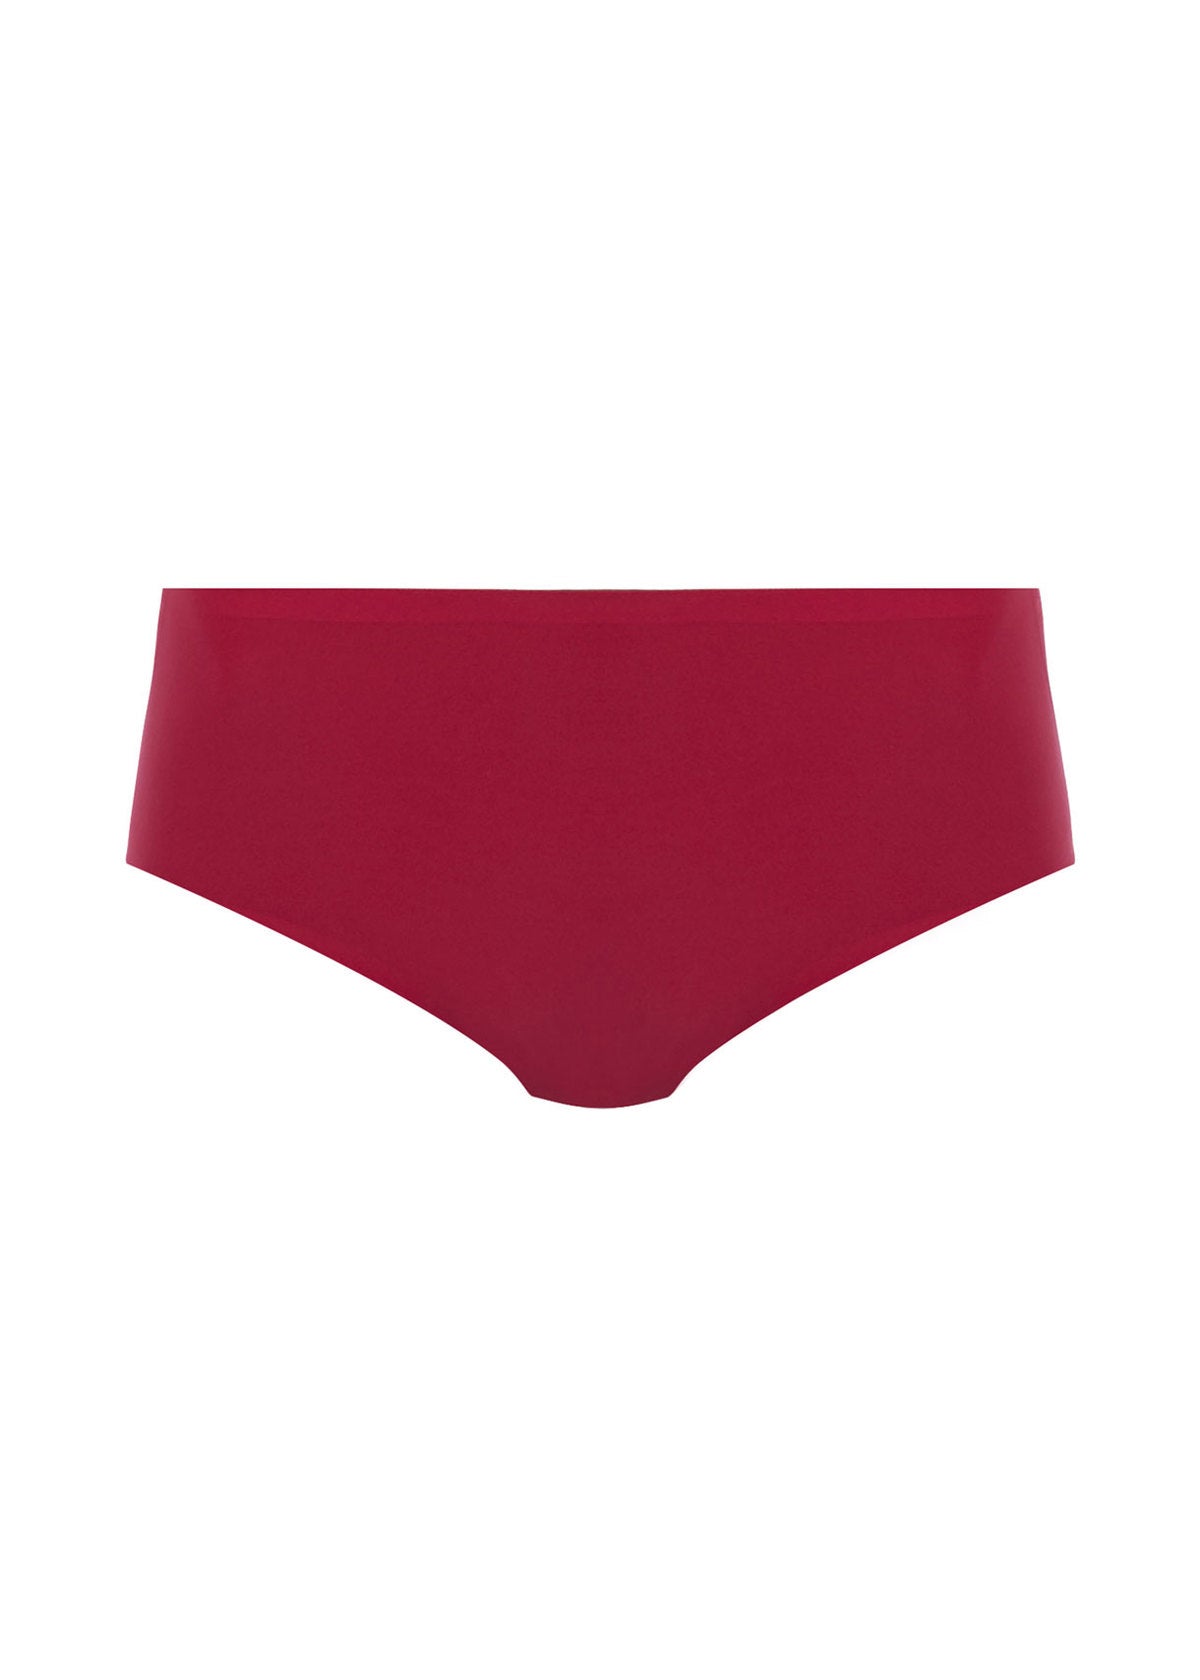 Smoothease Mid Brief One Size in red front view product image